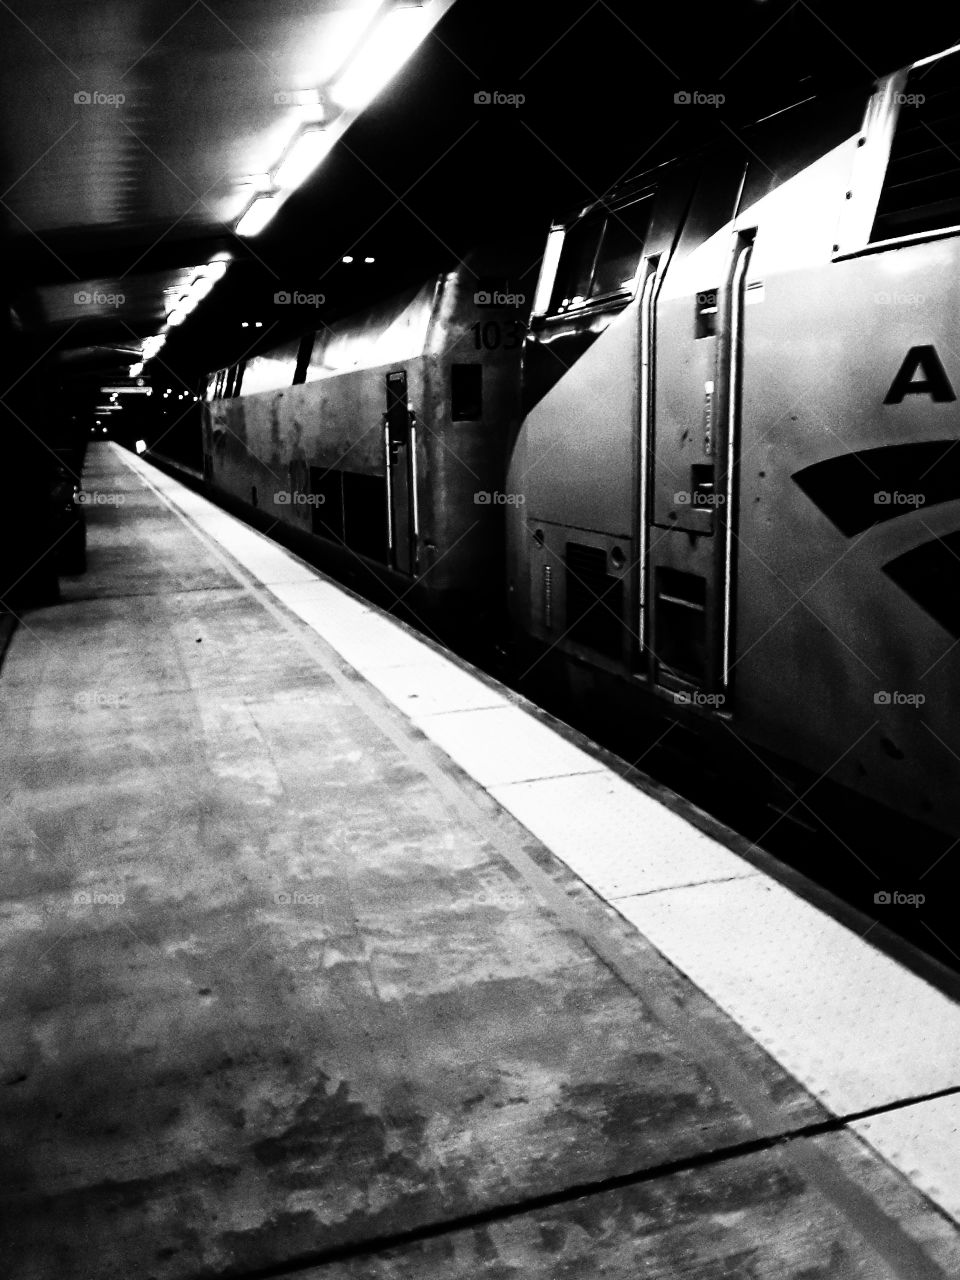 Amtrak Train in Station Silhouette  Black and White